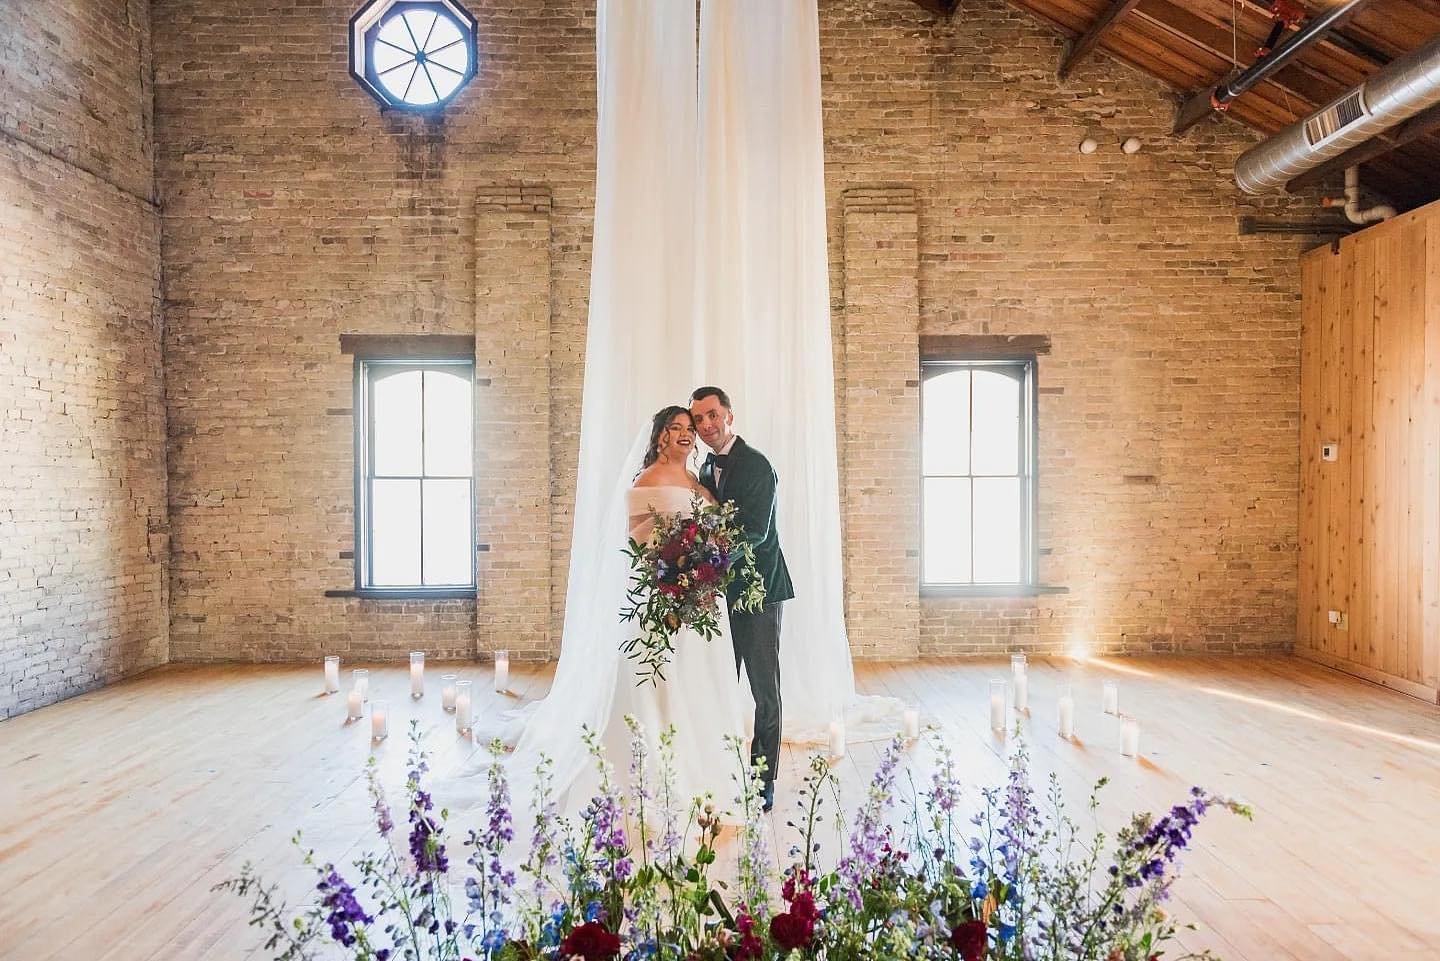 Deep fuchsia garden roses, clarinet red garden roses, plum anemones, blue eringum, plum acacia, brownie lisianthus and little greenery for a gorgeous moody vibe at The Lageret 💜⁣
⁣
📸 @carolinecavalcante.ph⁣
Floral: @florabyjamae⁣
Venue: @thelageret